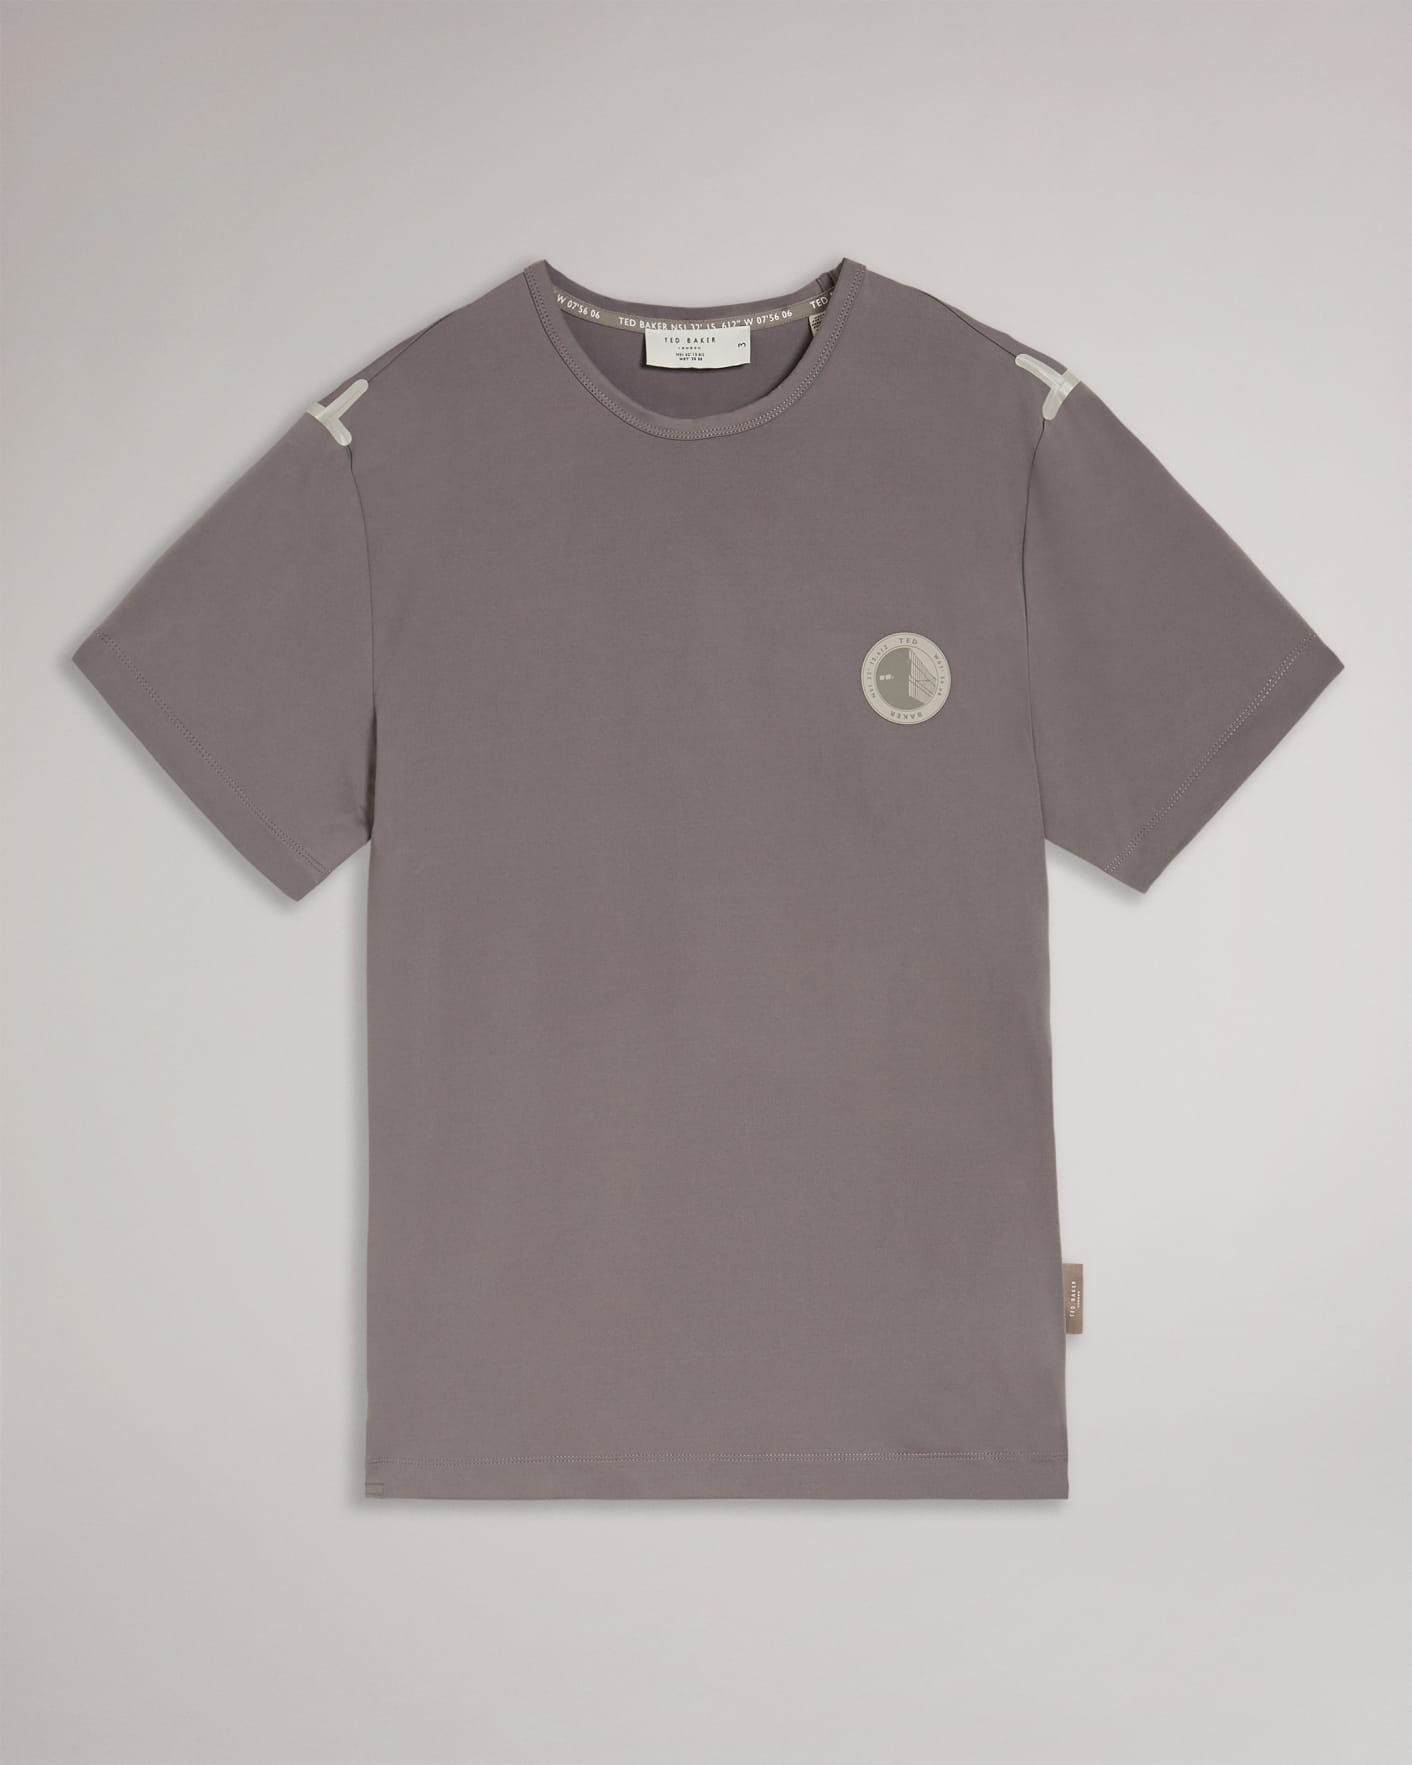 Grey-Marl Short Sleeve Active Quick Dry T Shirt Ted Baker